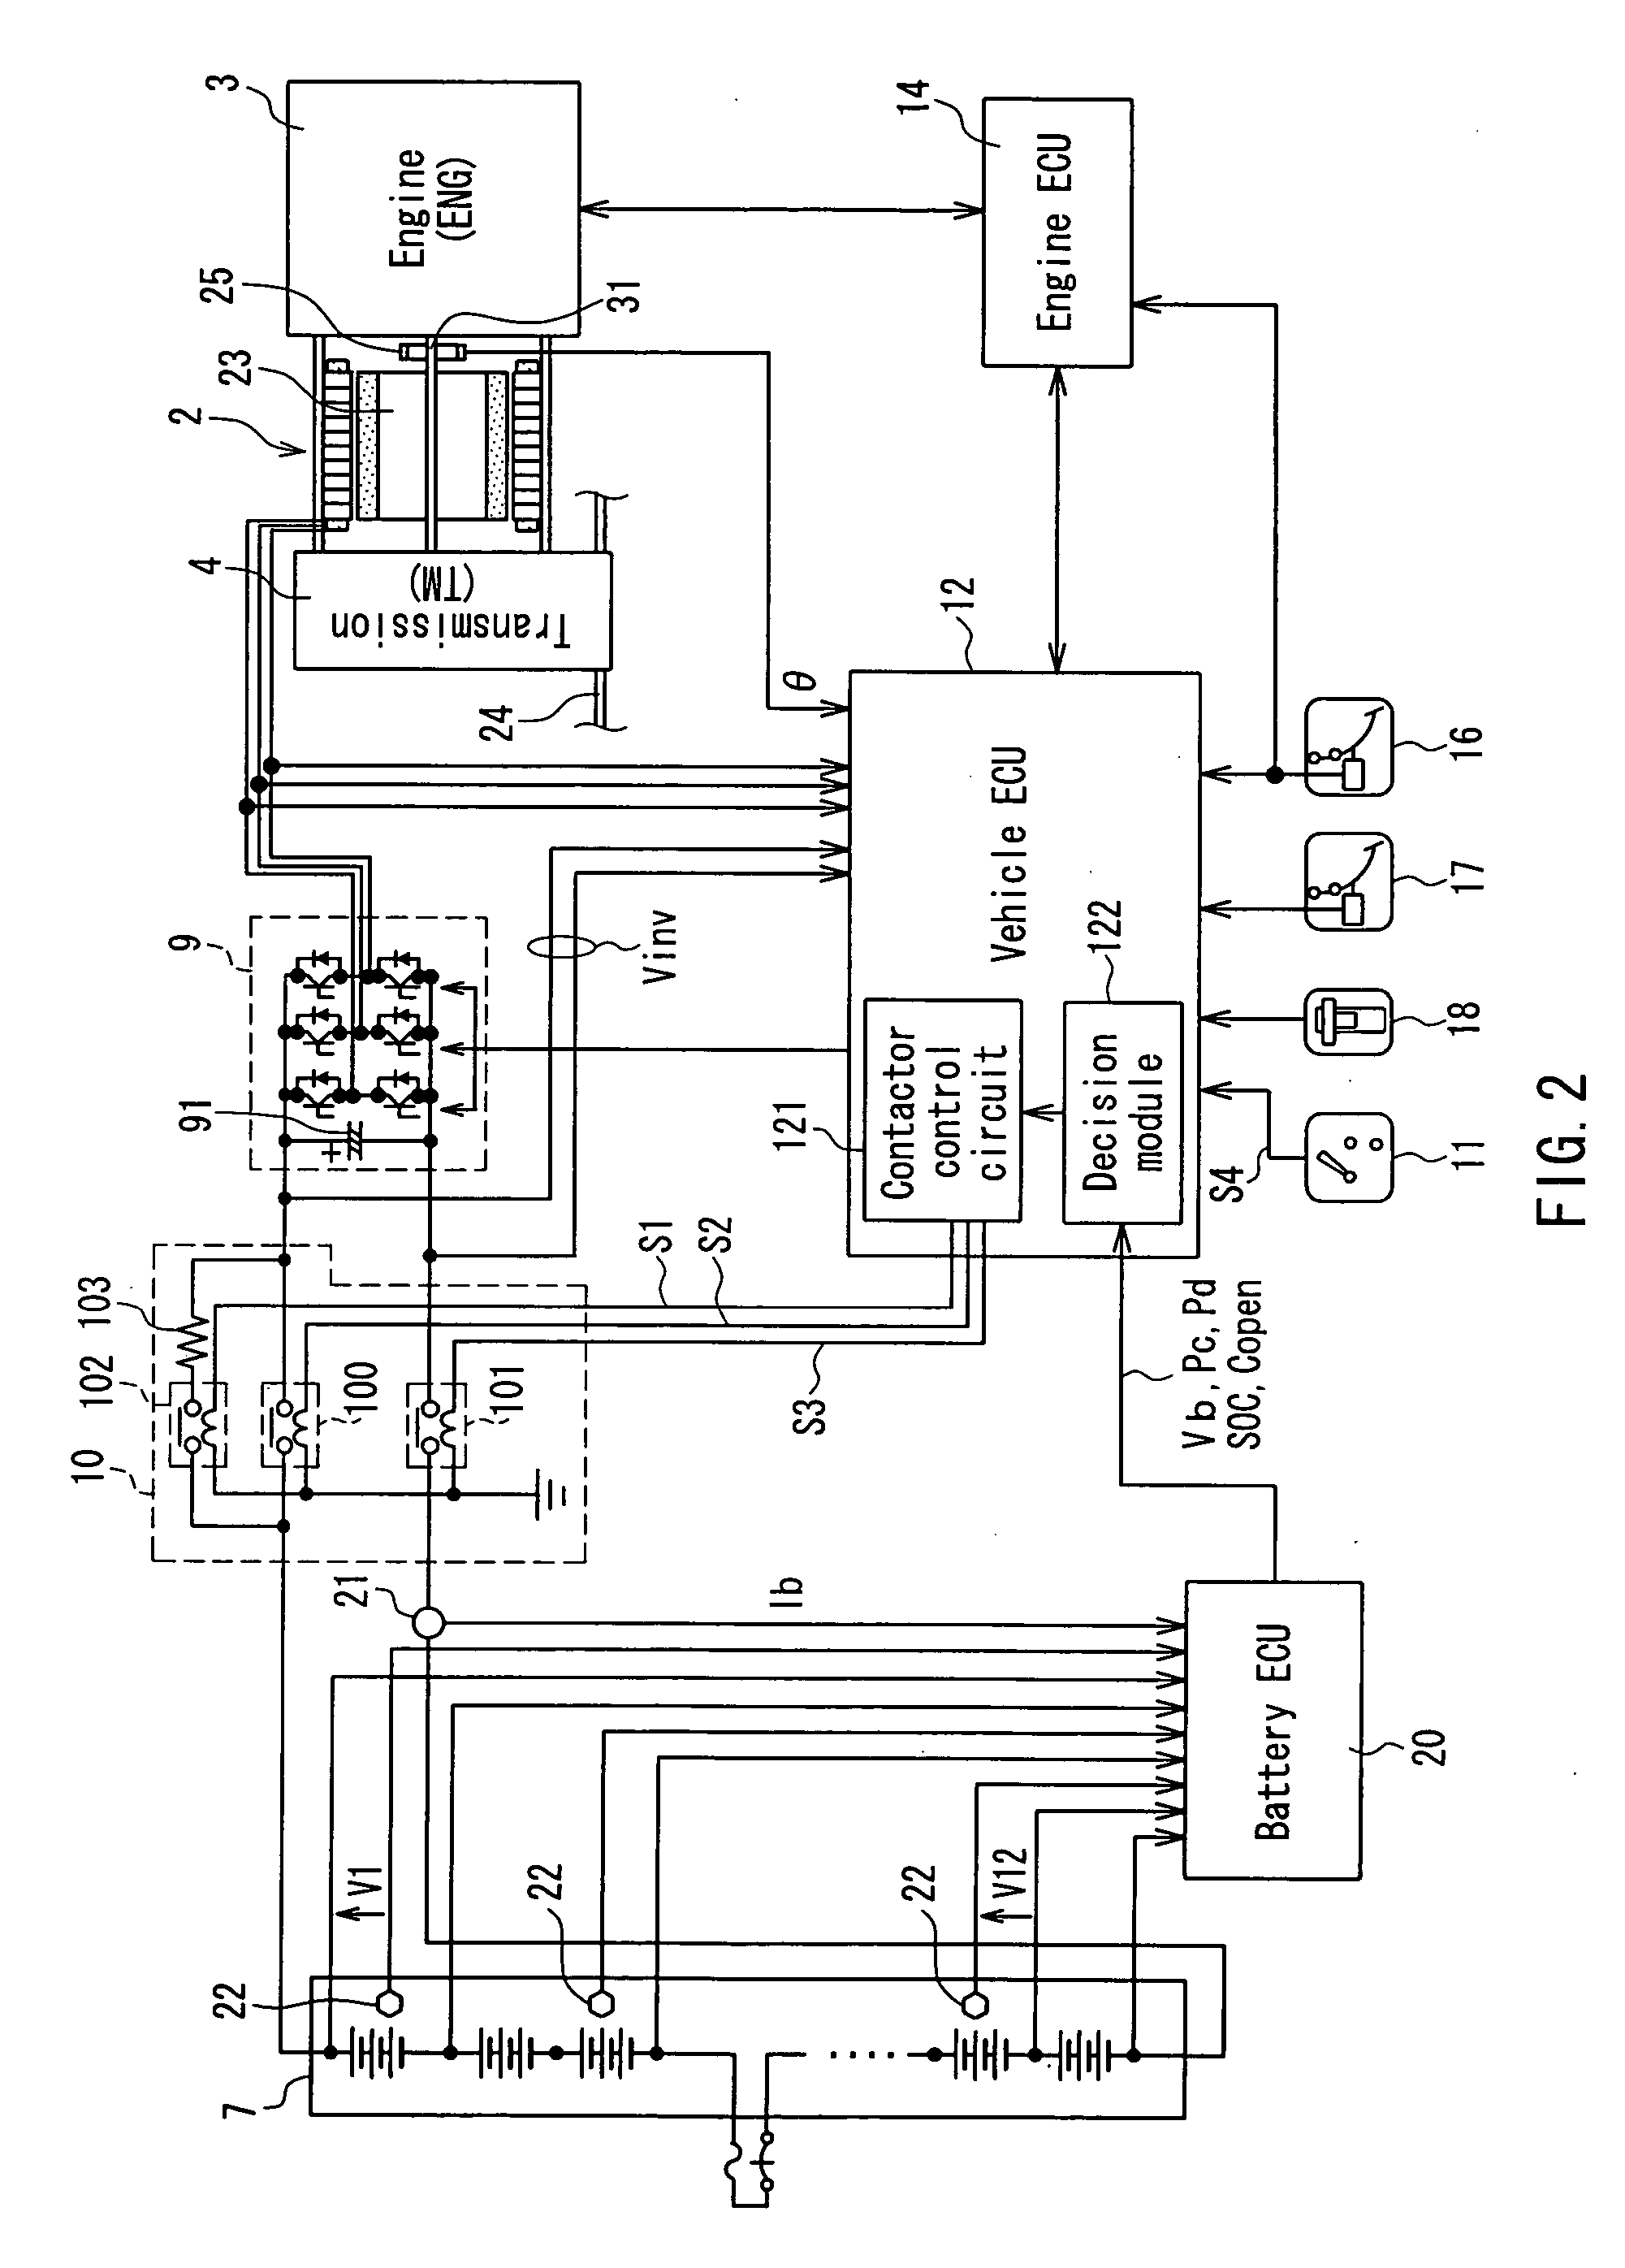 Power supply controller, electric vehicle and battery control unit